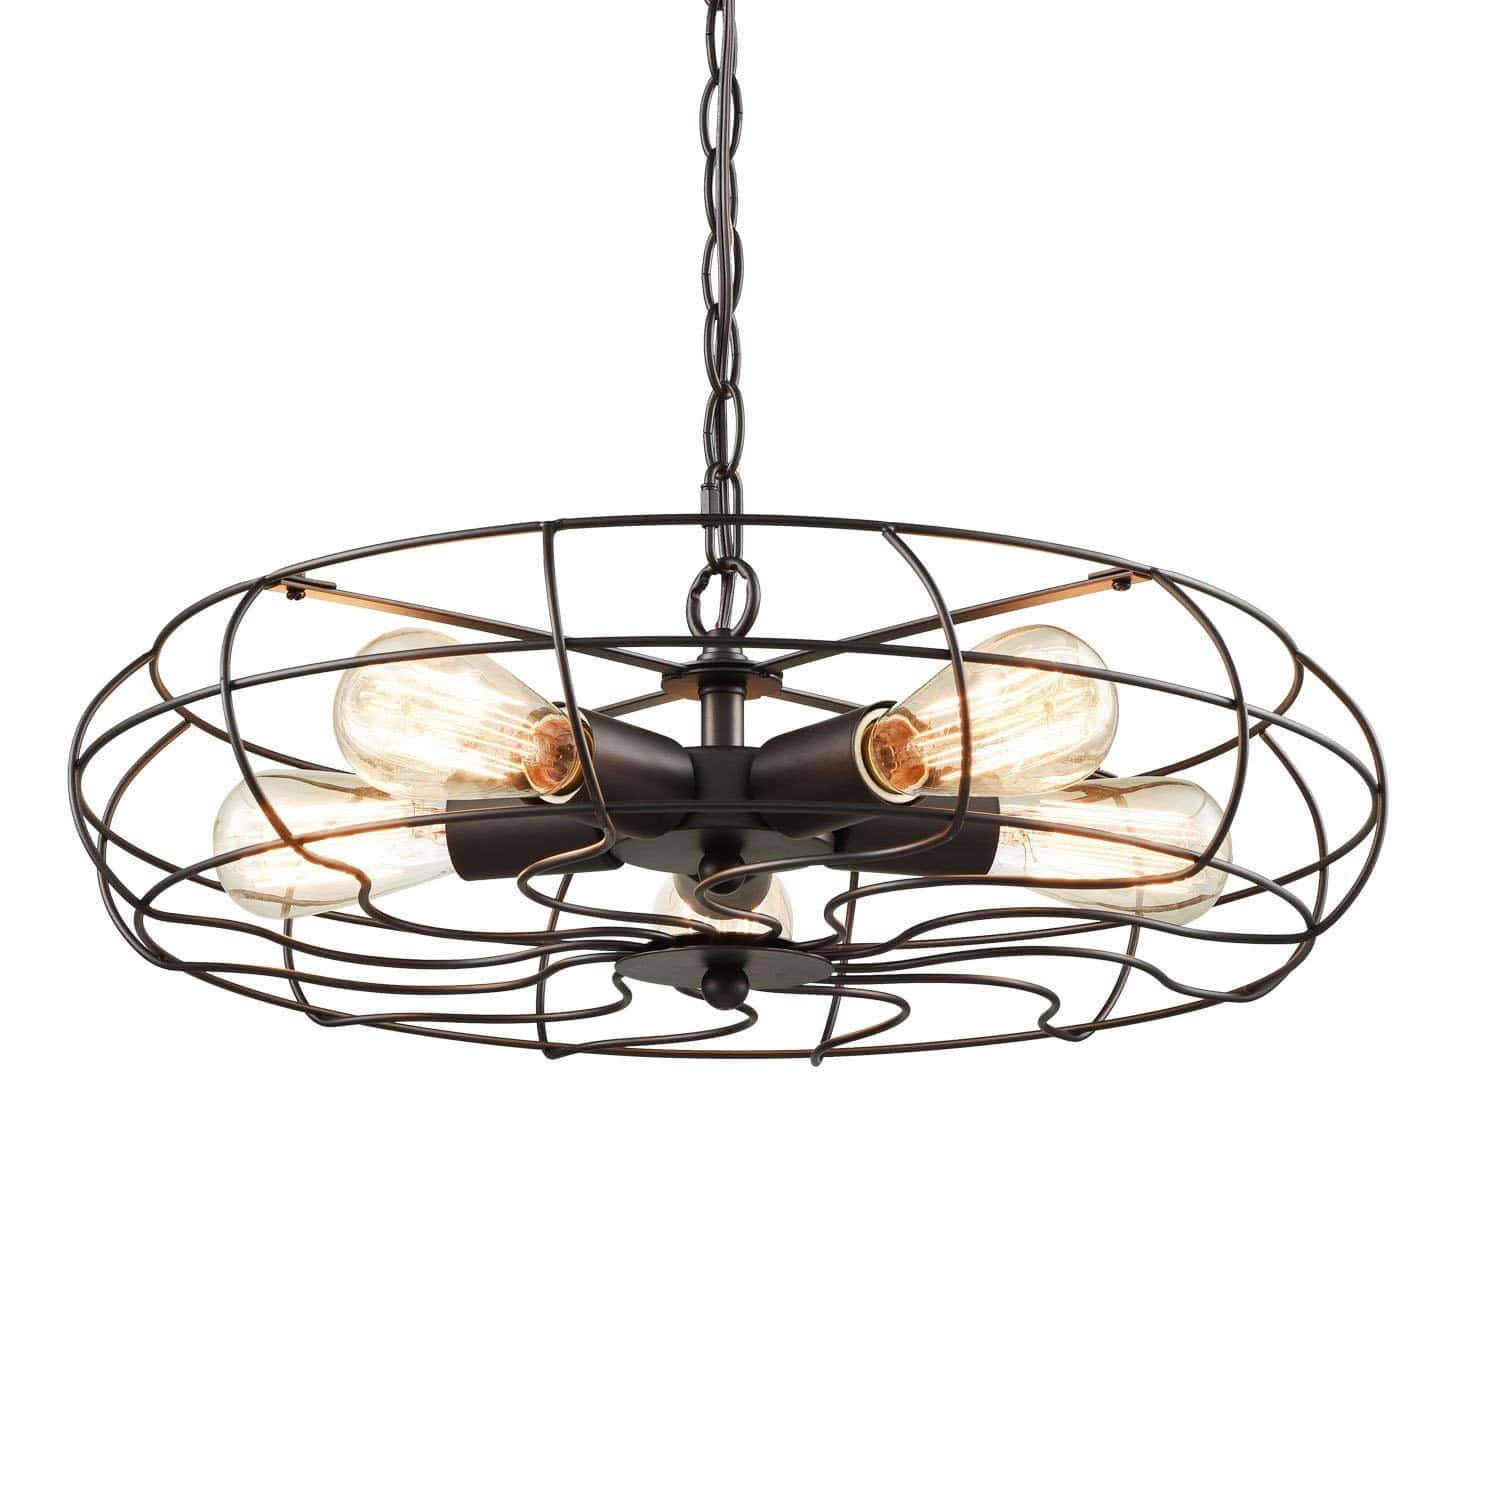 22" Industrial Rustic Big Cage Ceiling Light Wrought Iron Pendant Light Fixture